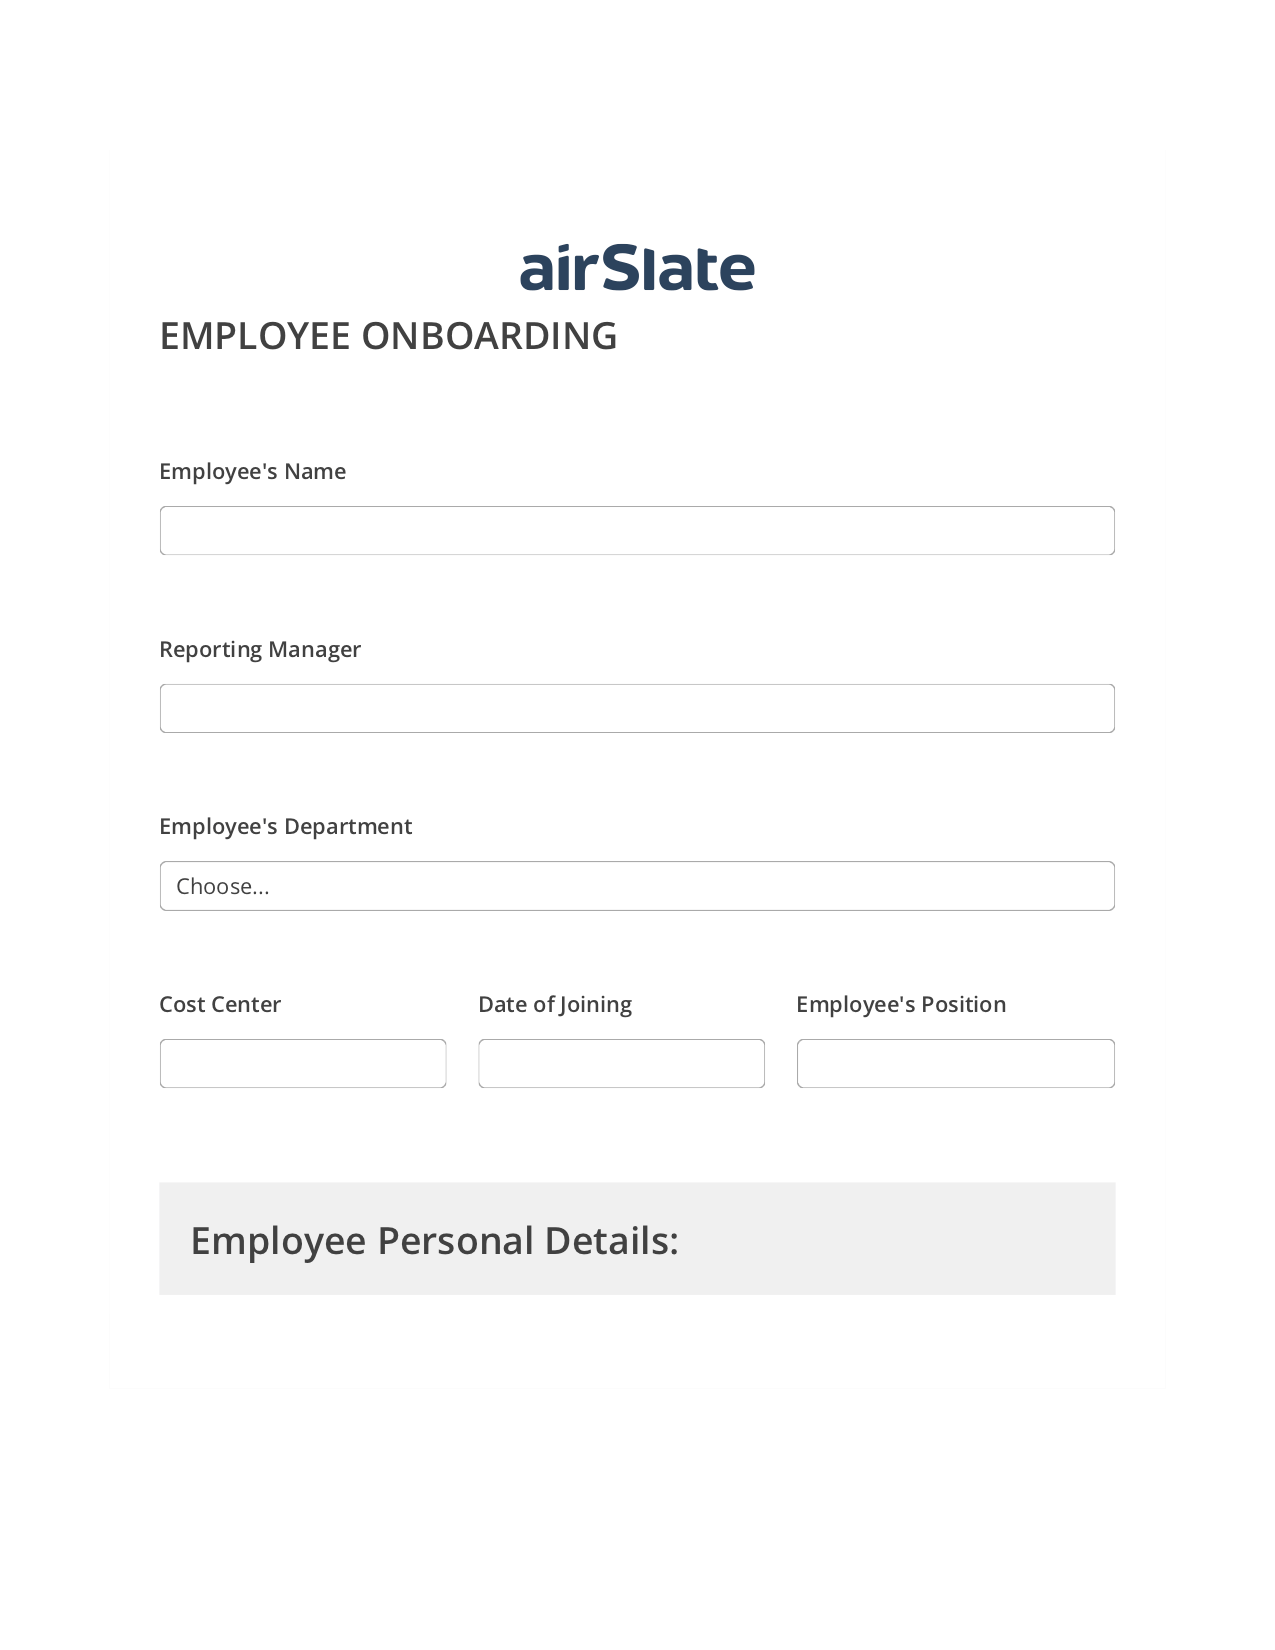 Employee Onboarding Workflow Pre-fill from CSV File Dropdown Options Bot, Email Notification Bot, Export to NetSuite Bot